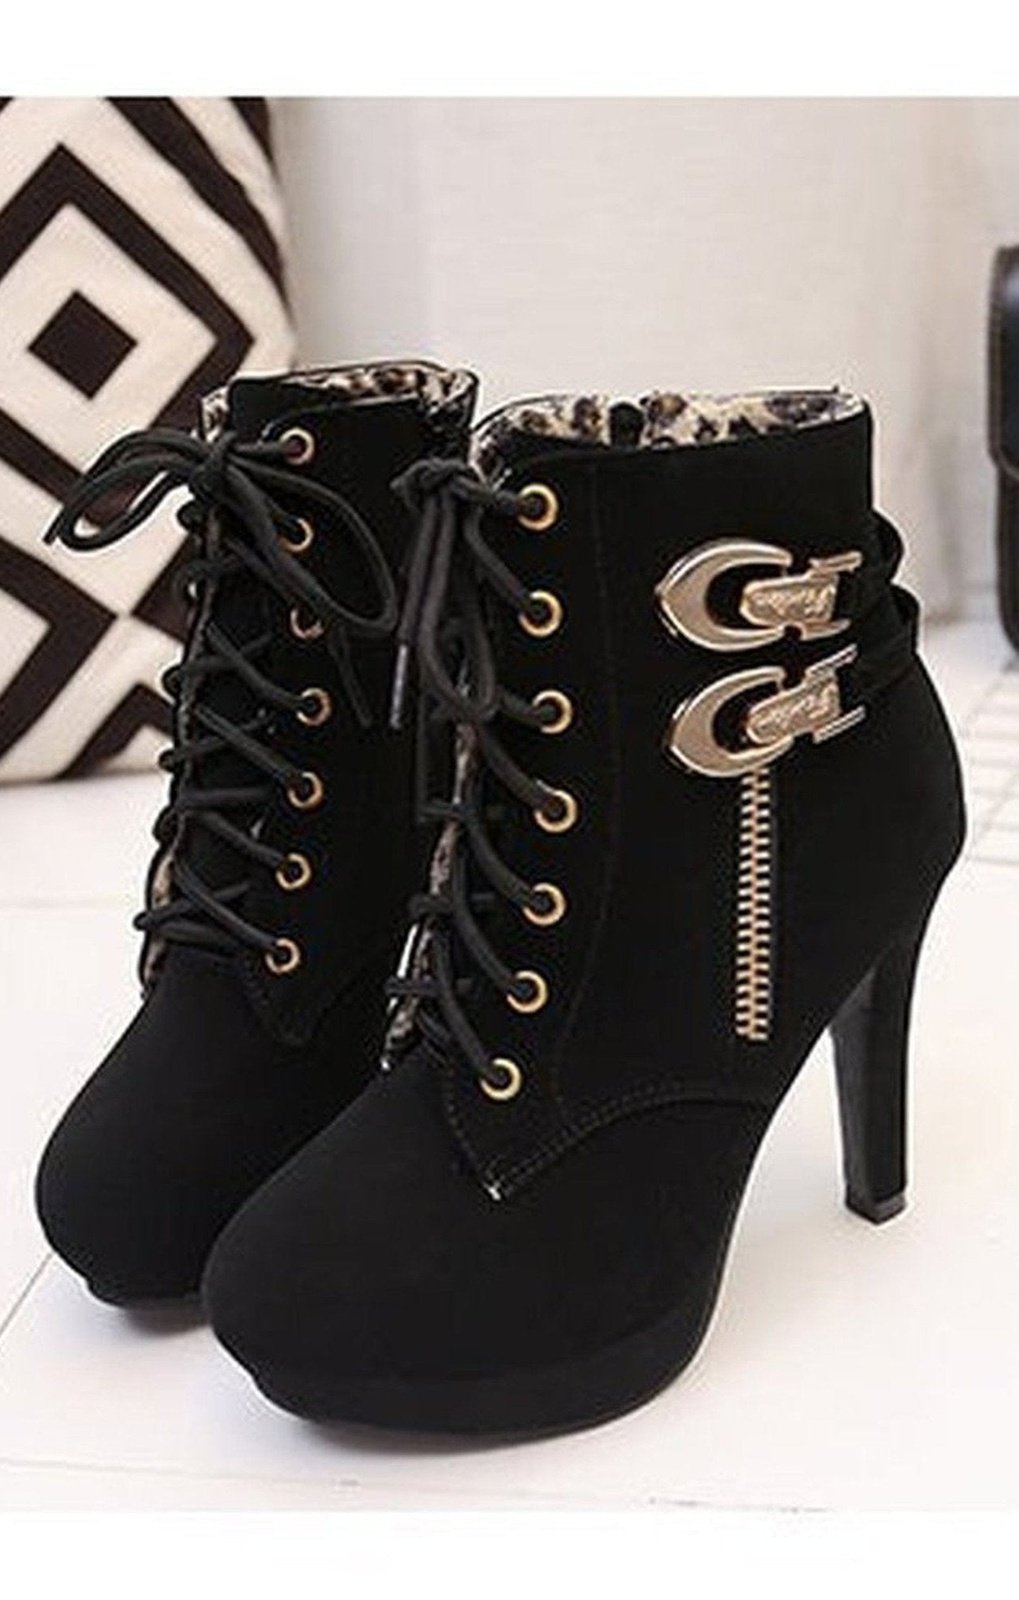 Stiletto Lace Up Booties in Engineered Suede